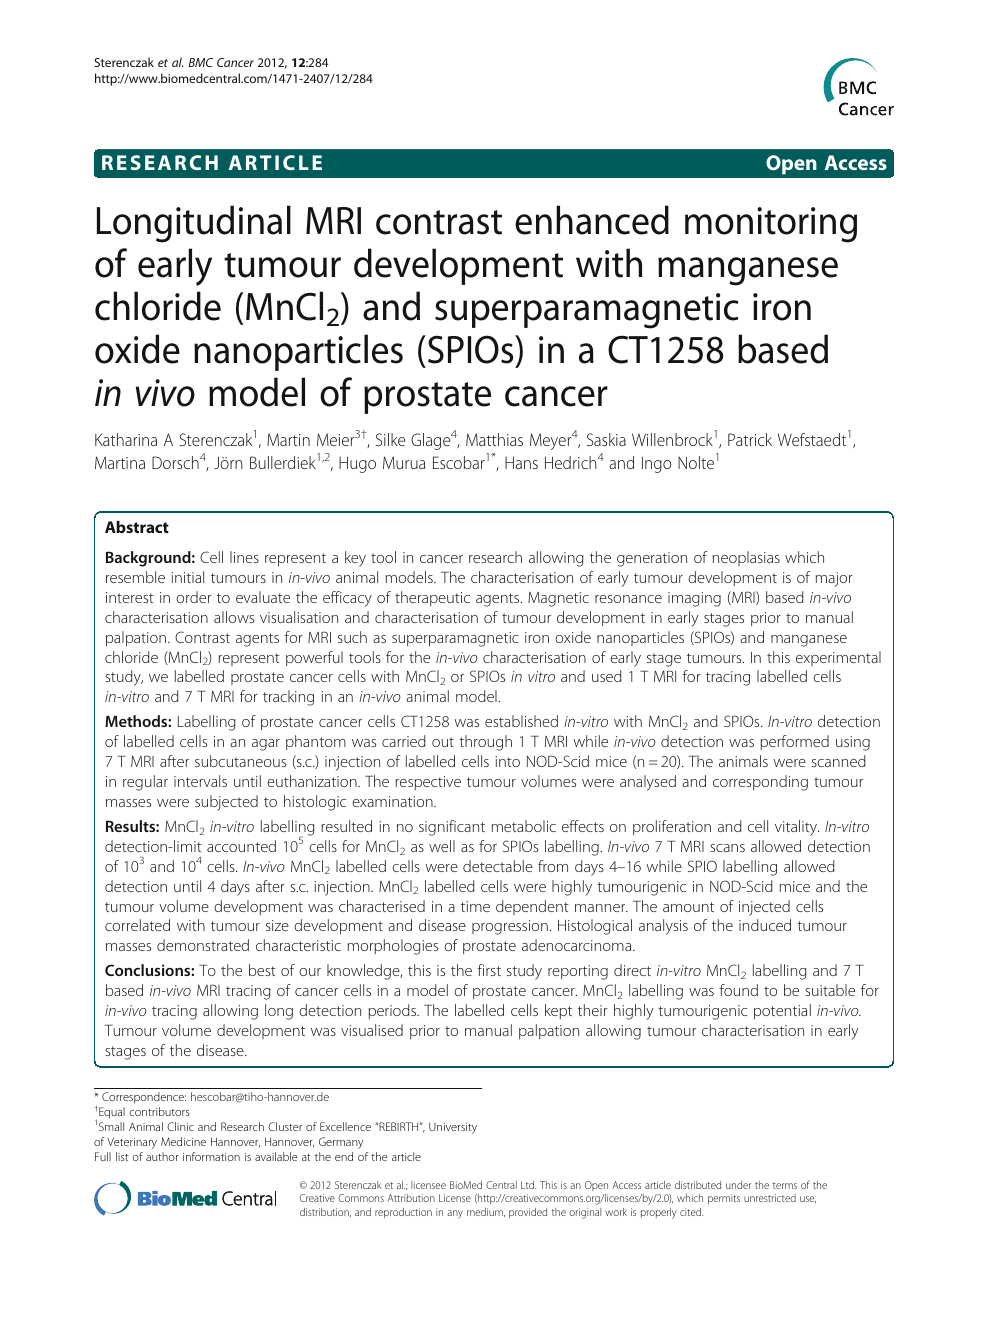 Longitudinal Mri Contrast Enhanced Monitoring Of Early Tumour Development With Manganese Chloride Mncl2 And Superparamagnetic Iron Oxide Nanoparticles Spios In A Ct1258 Based In Vivo Model Of Prostate Cancer Topic Of